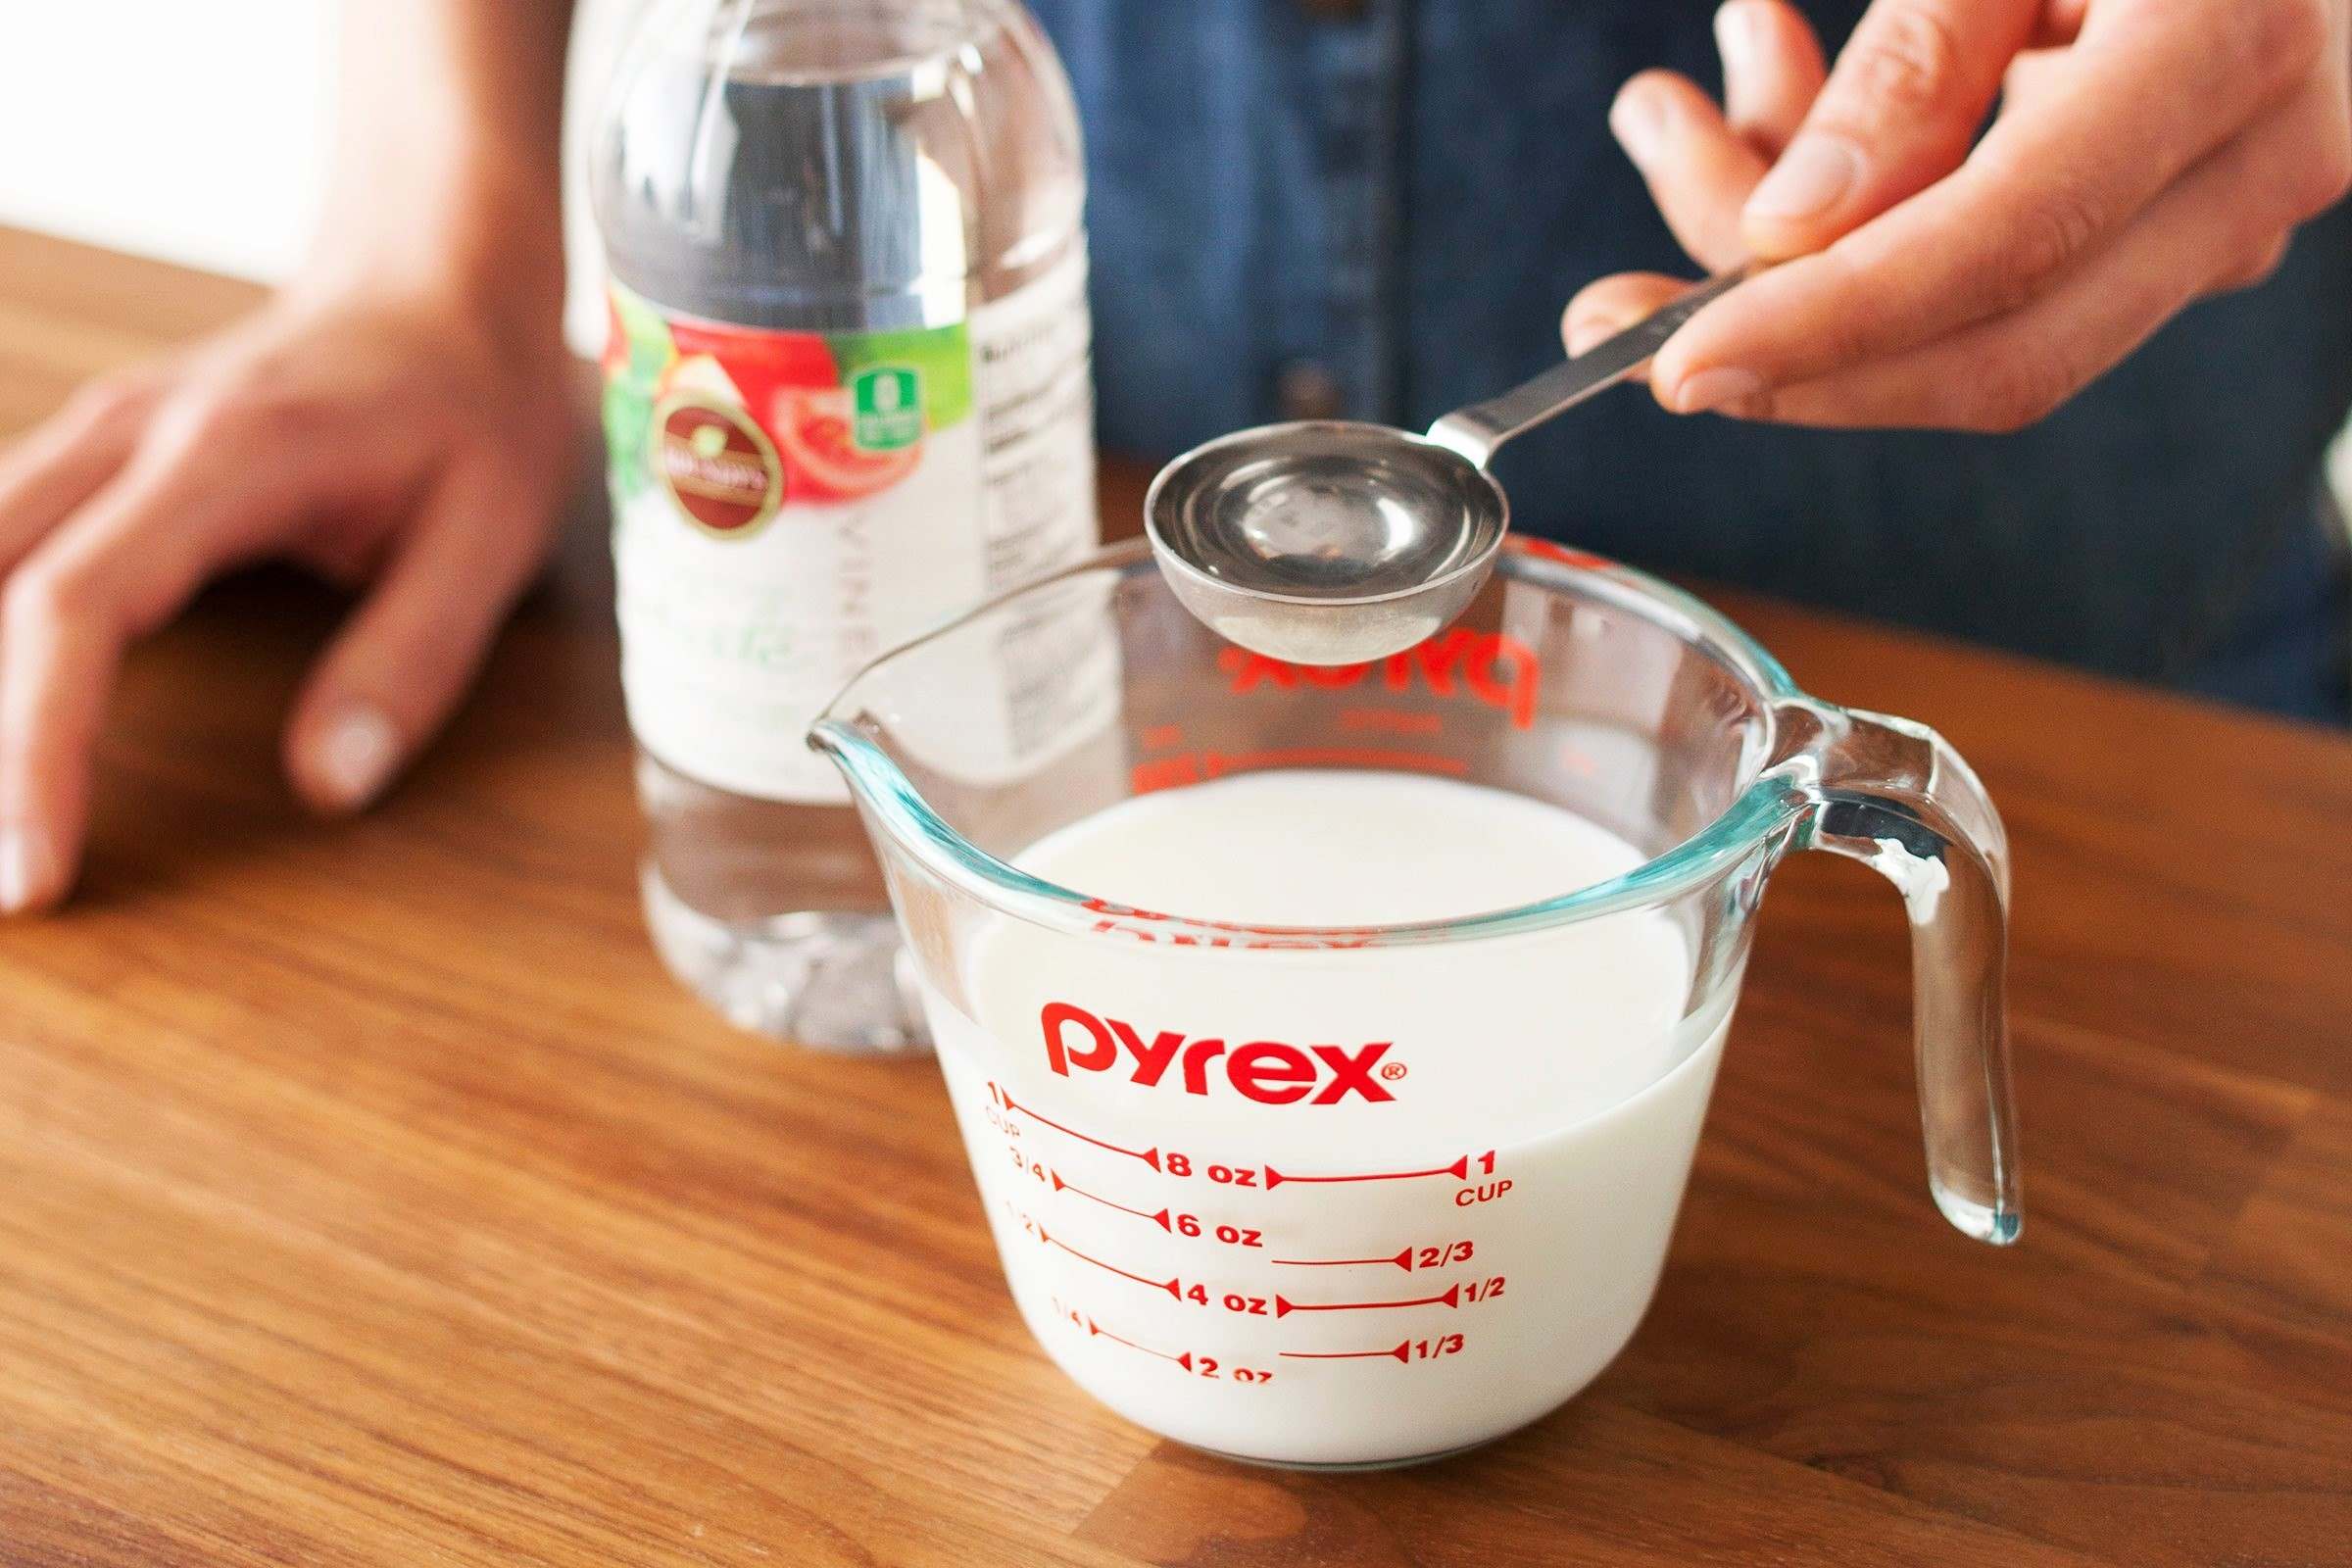 The Ultimate Hack For Measuring 1 1/3 Cups!